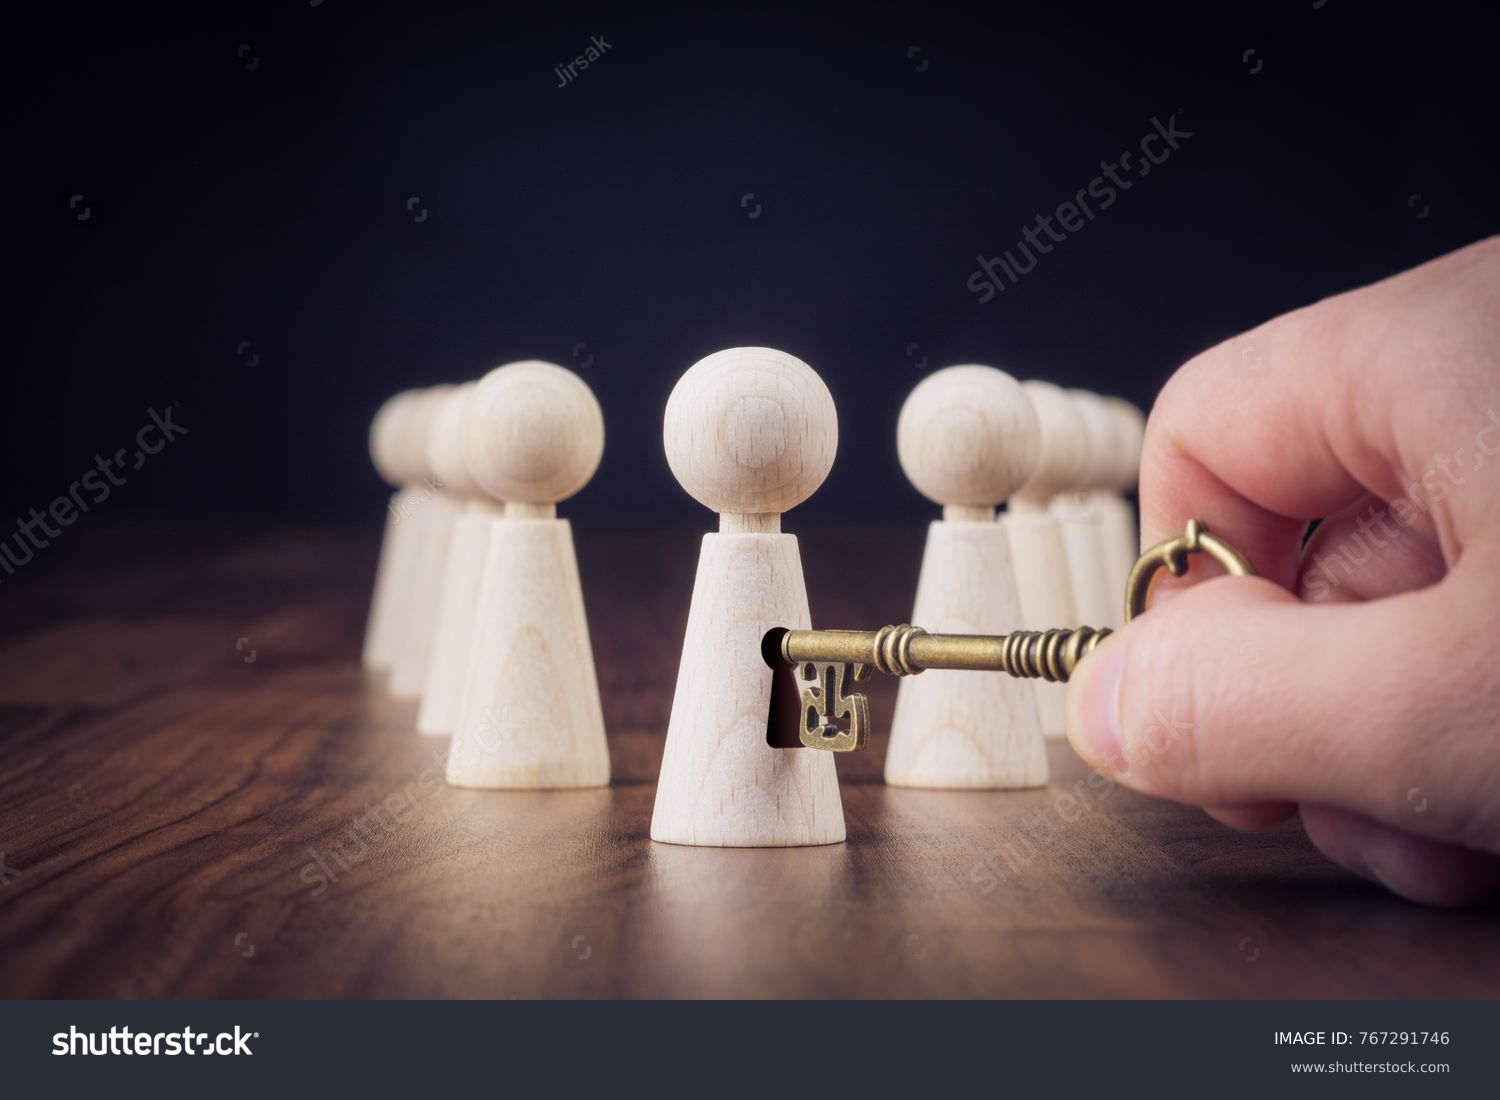 Unlock potential - motivational concept. Manager (HR specialist) unlock leader potential represented by figurine and hand with key. #767291746